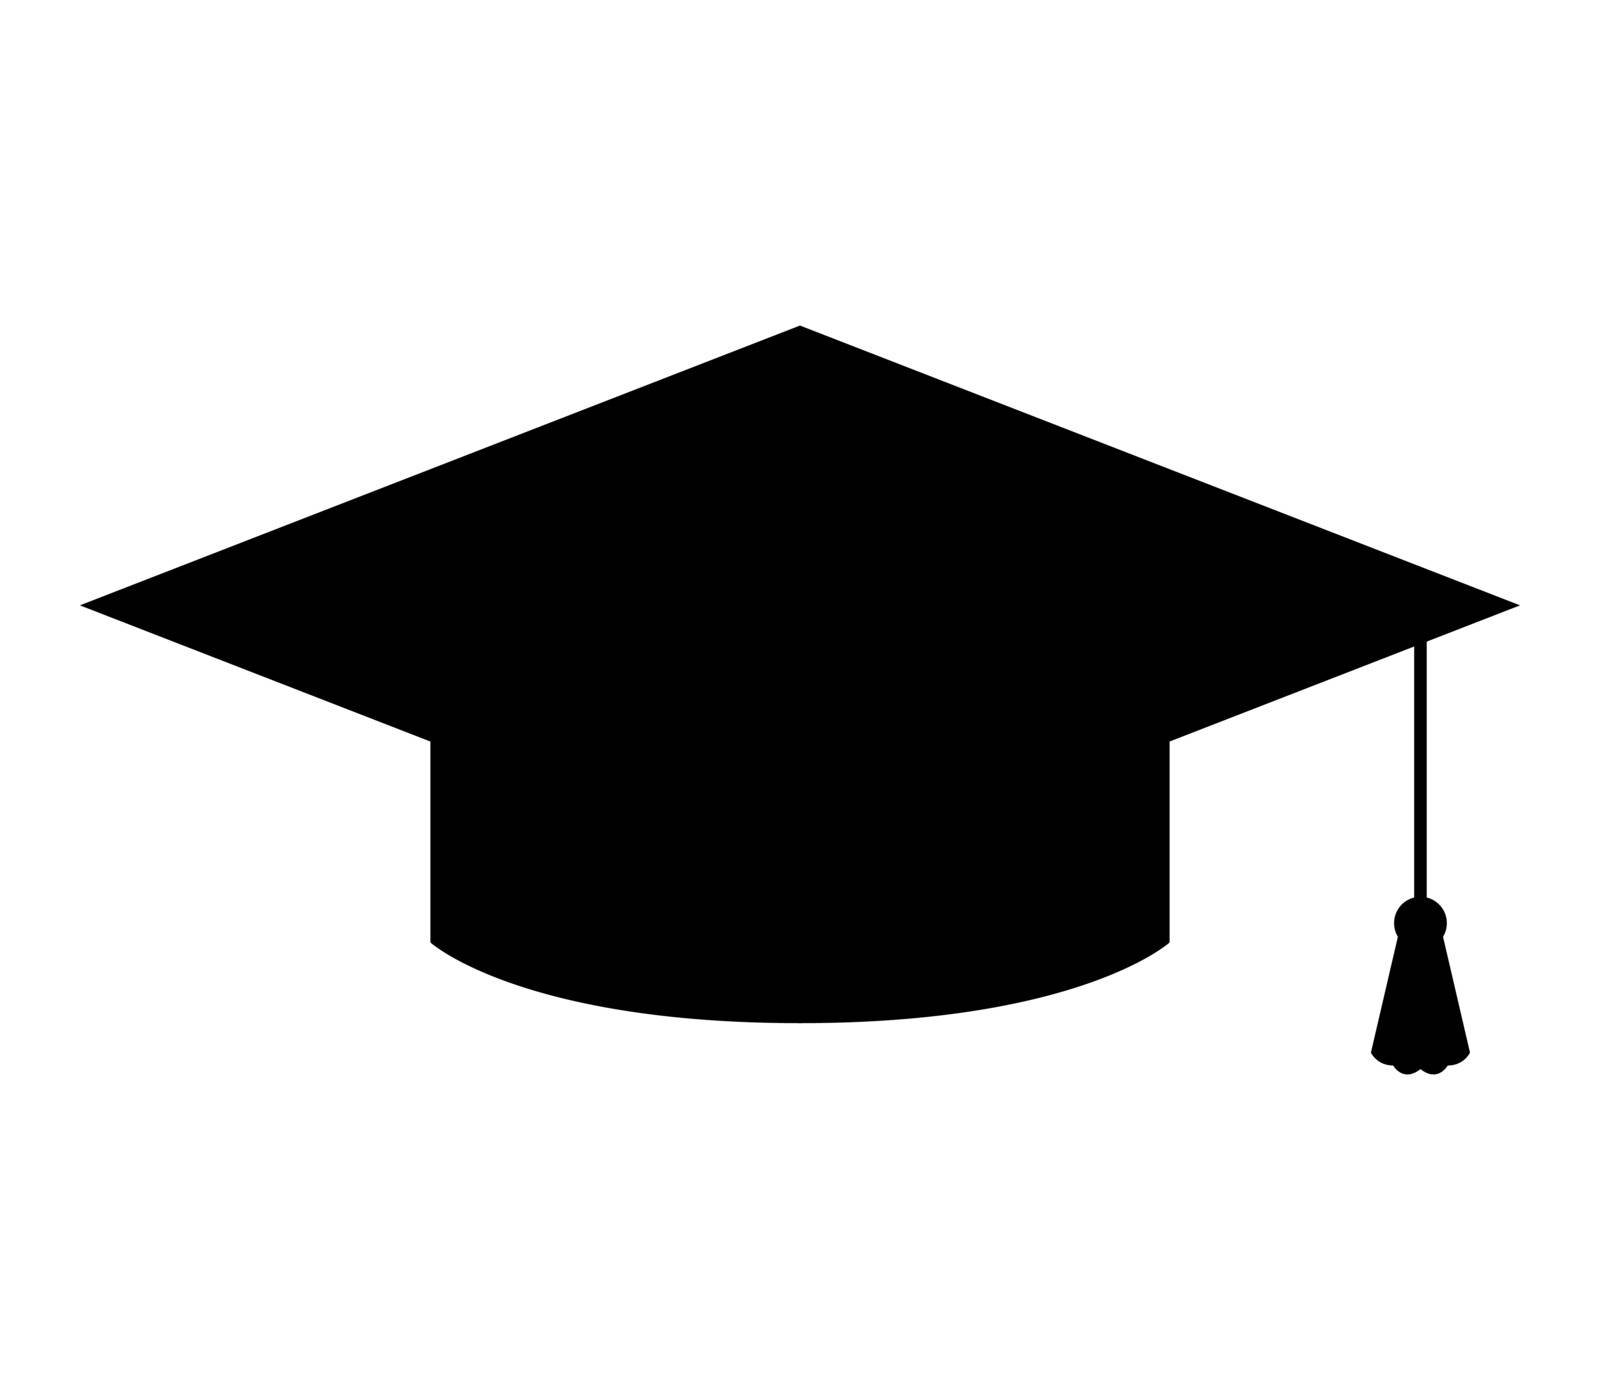 graduation hat icon by Mark1987